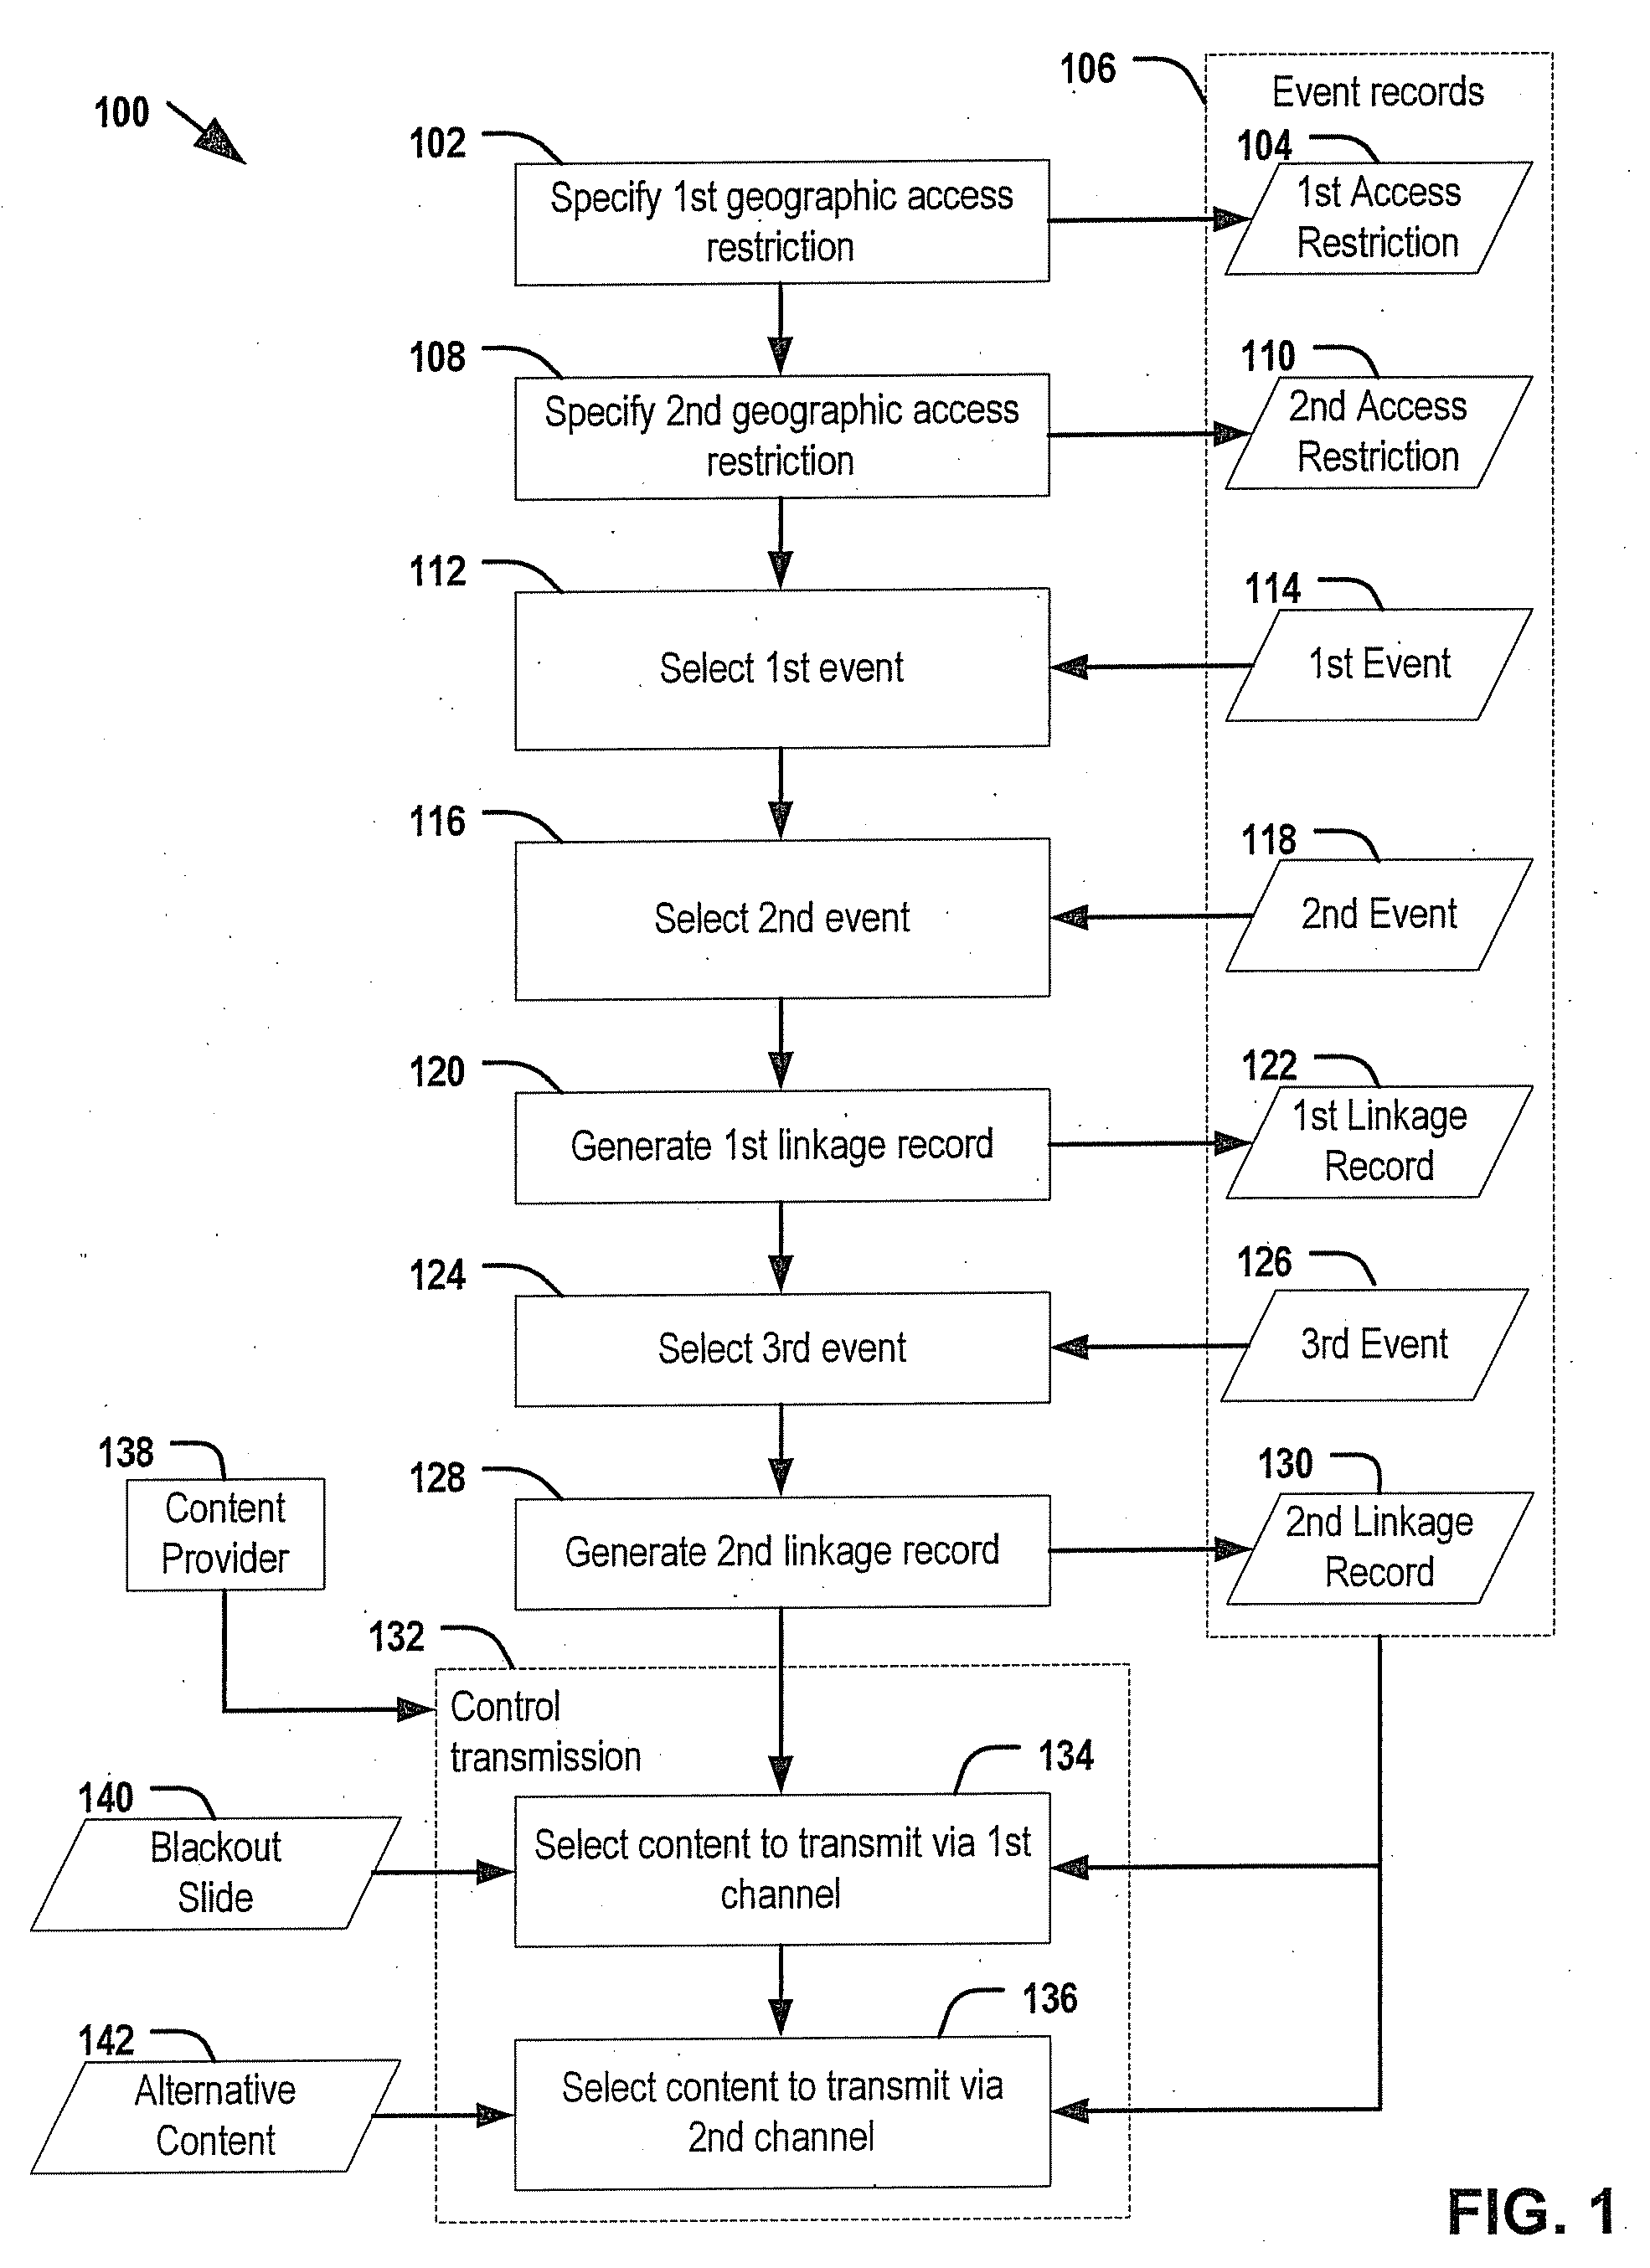 System and Method for Monitoring and Alarming IP-Based Video Blackout Events